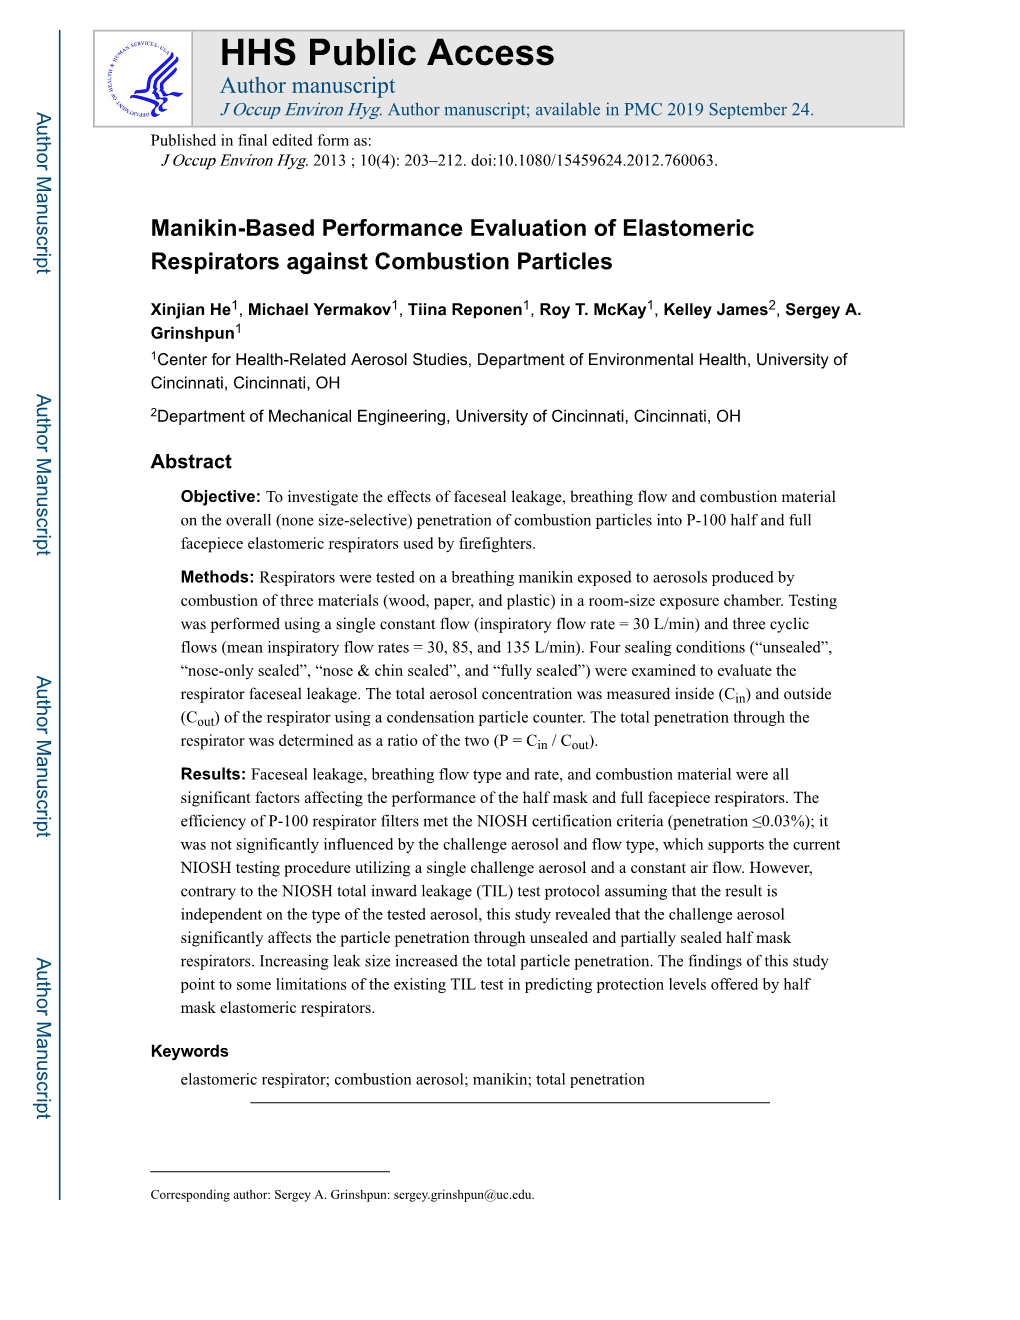 Manikin-Based Performance Evaluation of Elastomeric Respirators Against Combustion Particles